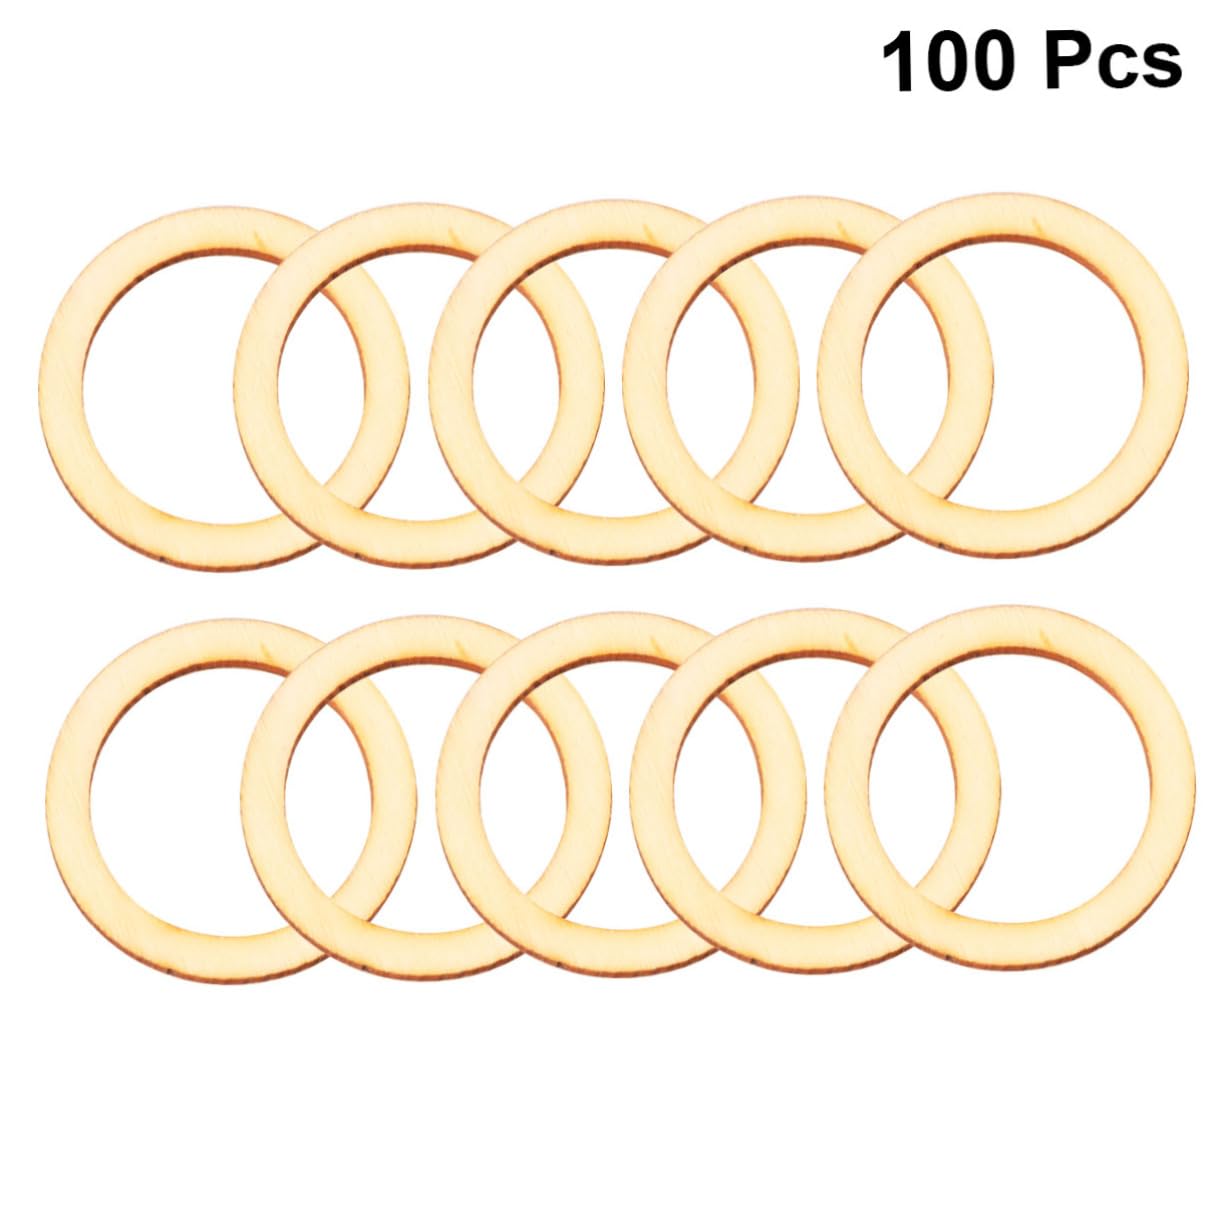 SEWACC 100pcs Macrame Wood Rings Wood Blanks Ring Cross Rings Dream Catcher Bamboo Hoops Wreath Frame Rustic Wood Slices Unfinished Wood Circles